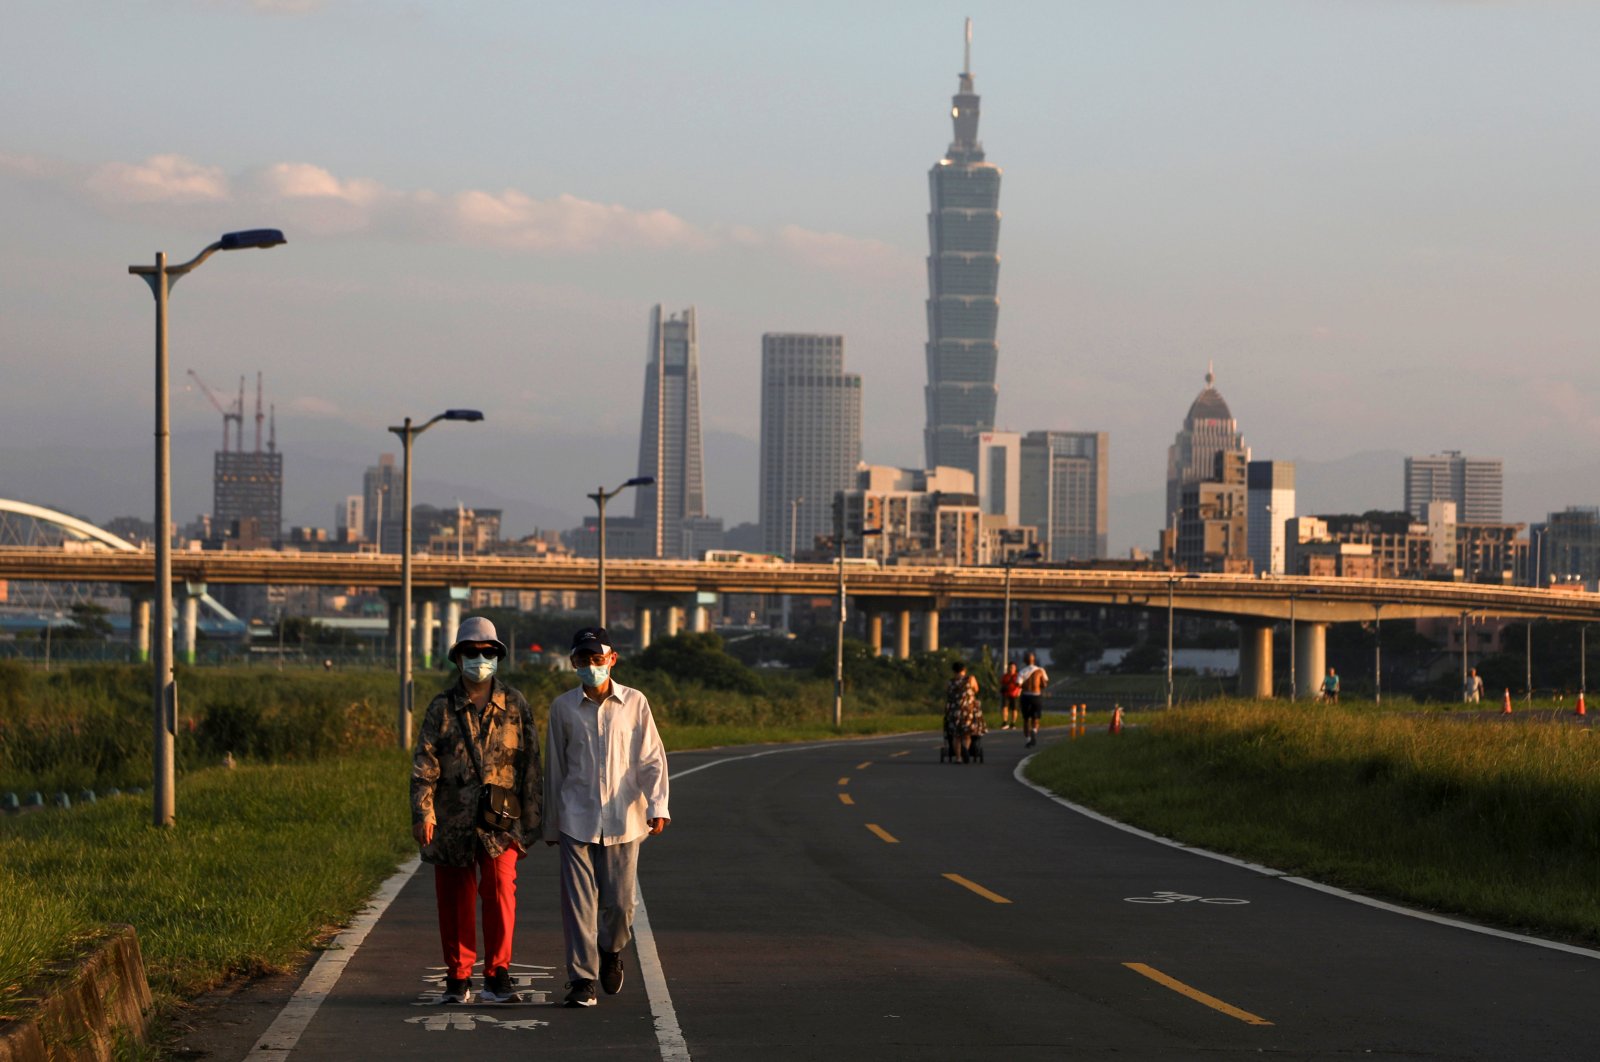 People wear protective masks to prevent the spread of the coronavirus as they walk on a river path at sunset in Taipei, Taiwan, Aug. 6, 2020. (Reuters Photo)